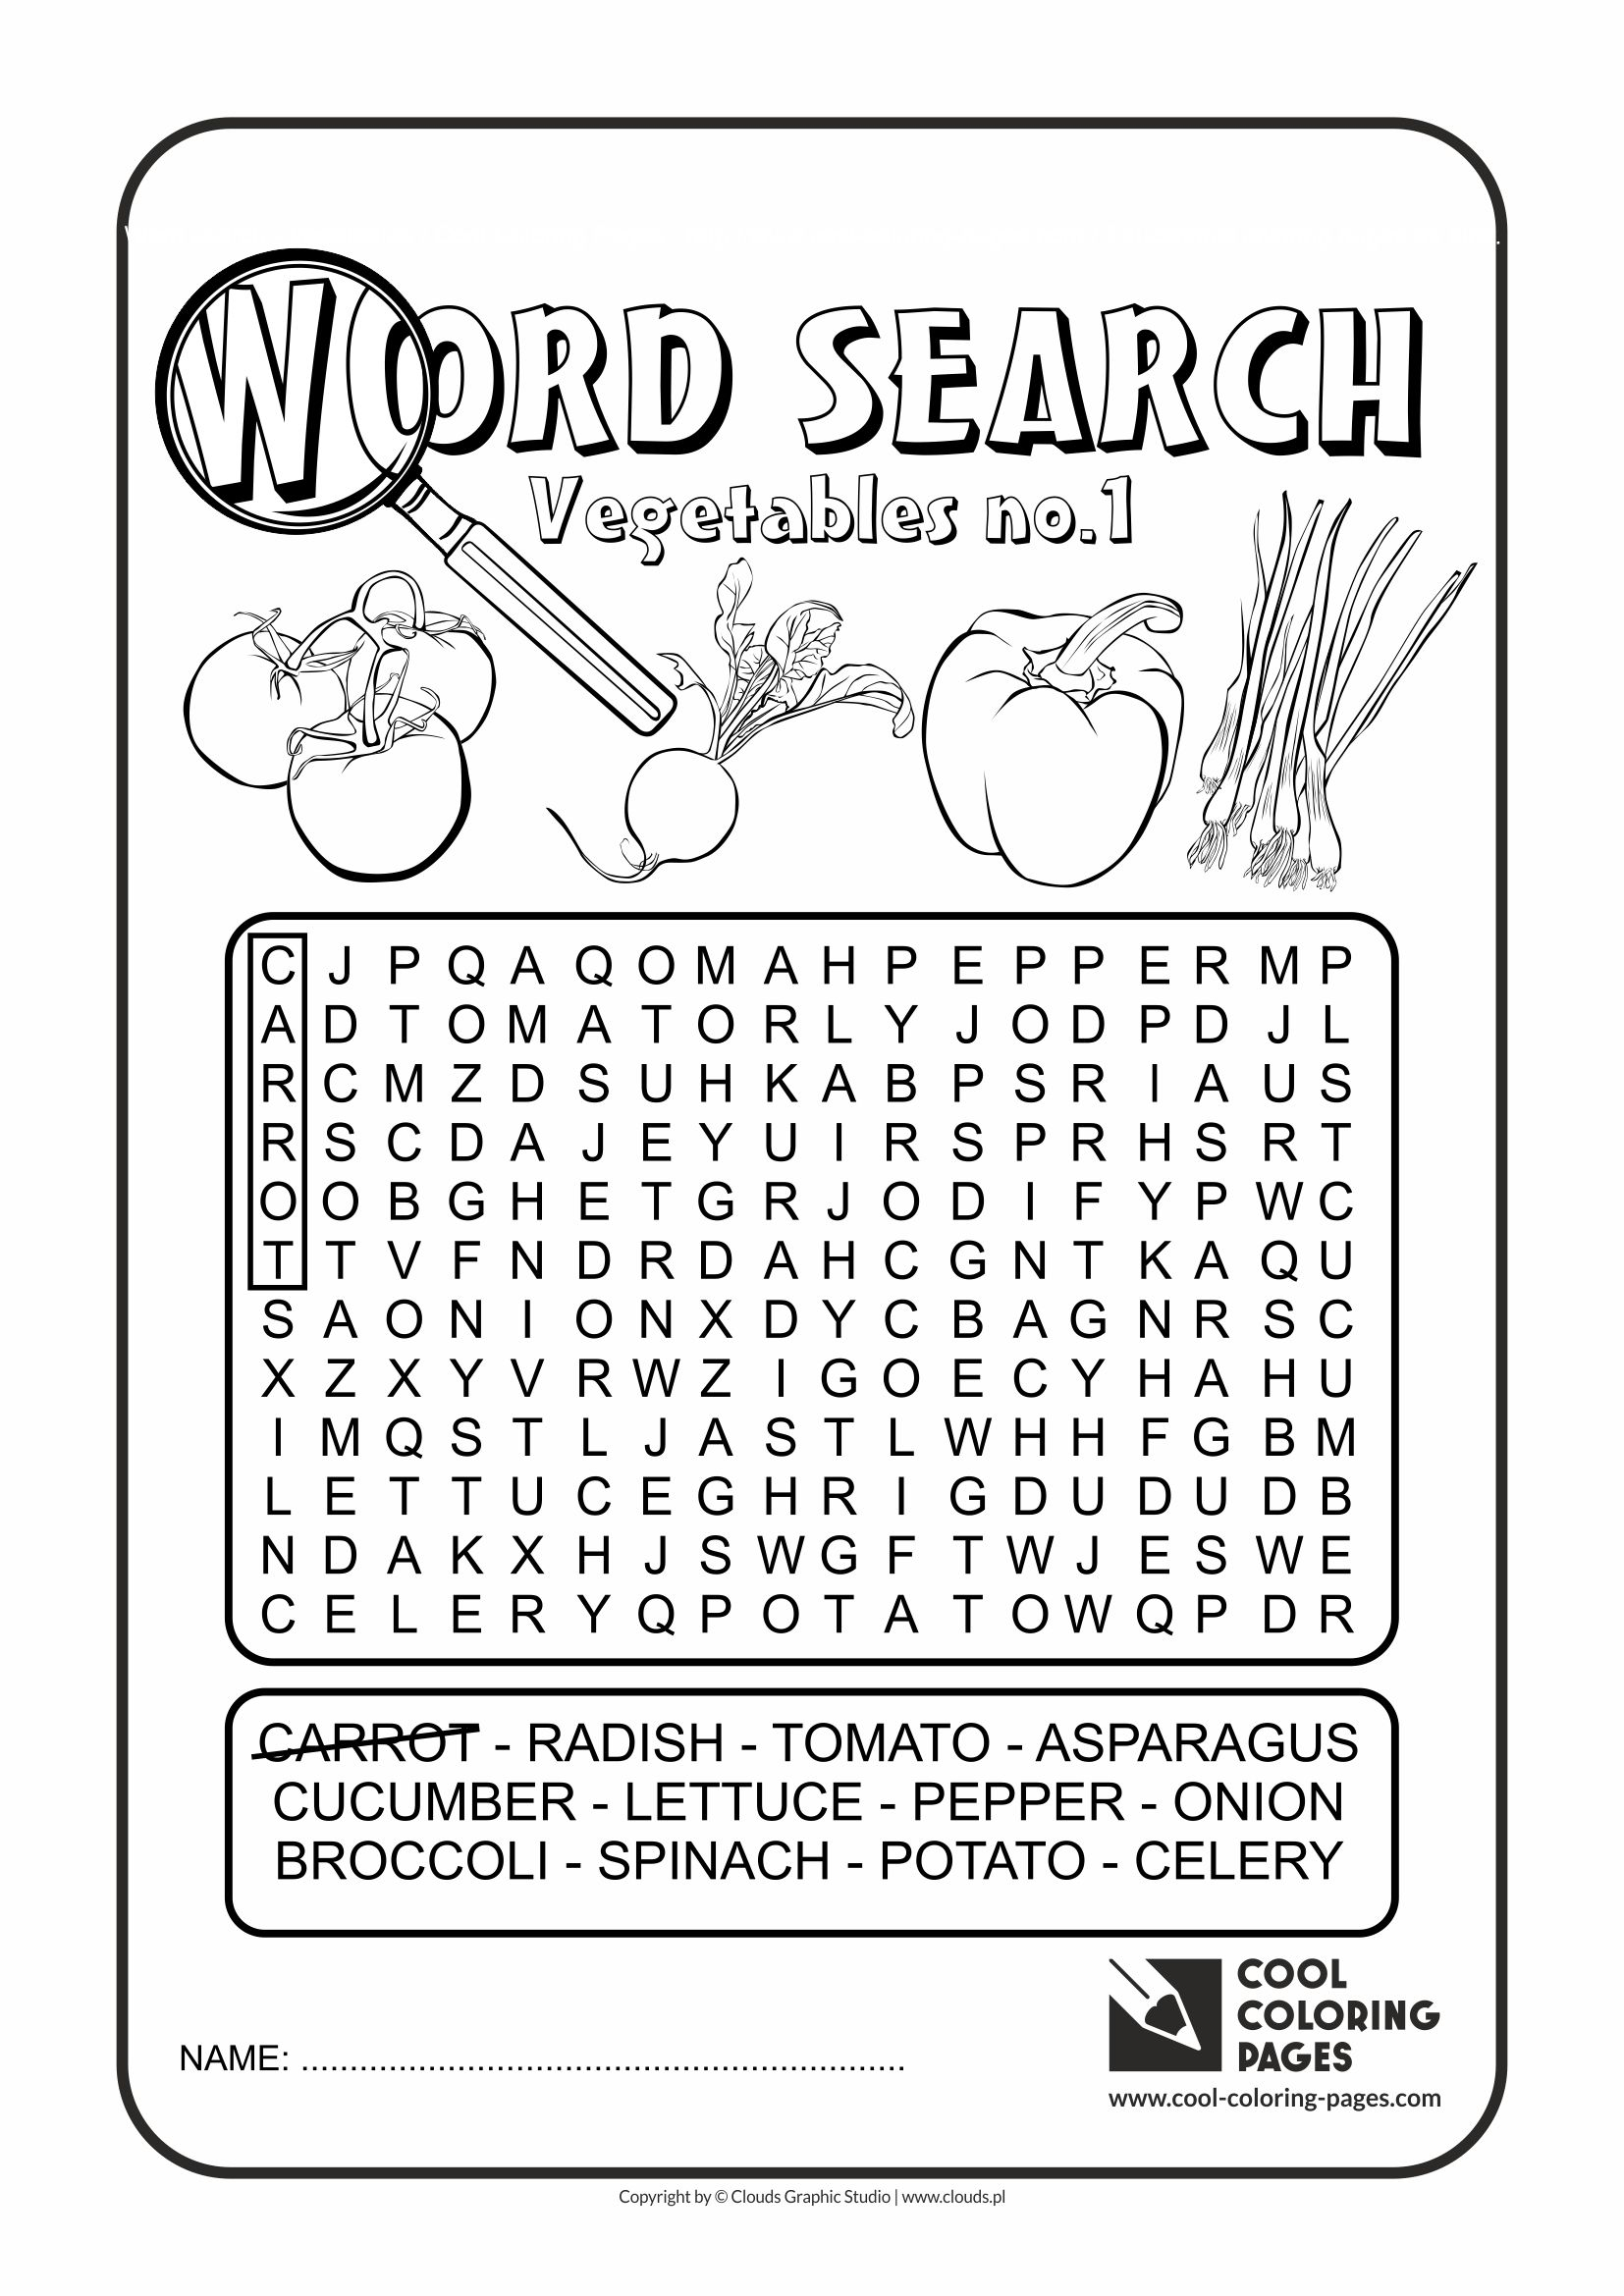 Word Search Coloring Pages Cool Coloring Pages Word Search Cool Coloring Pages Free